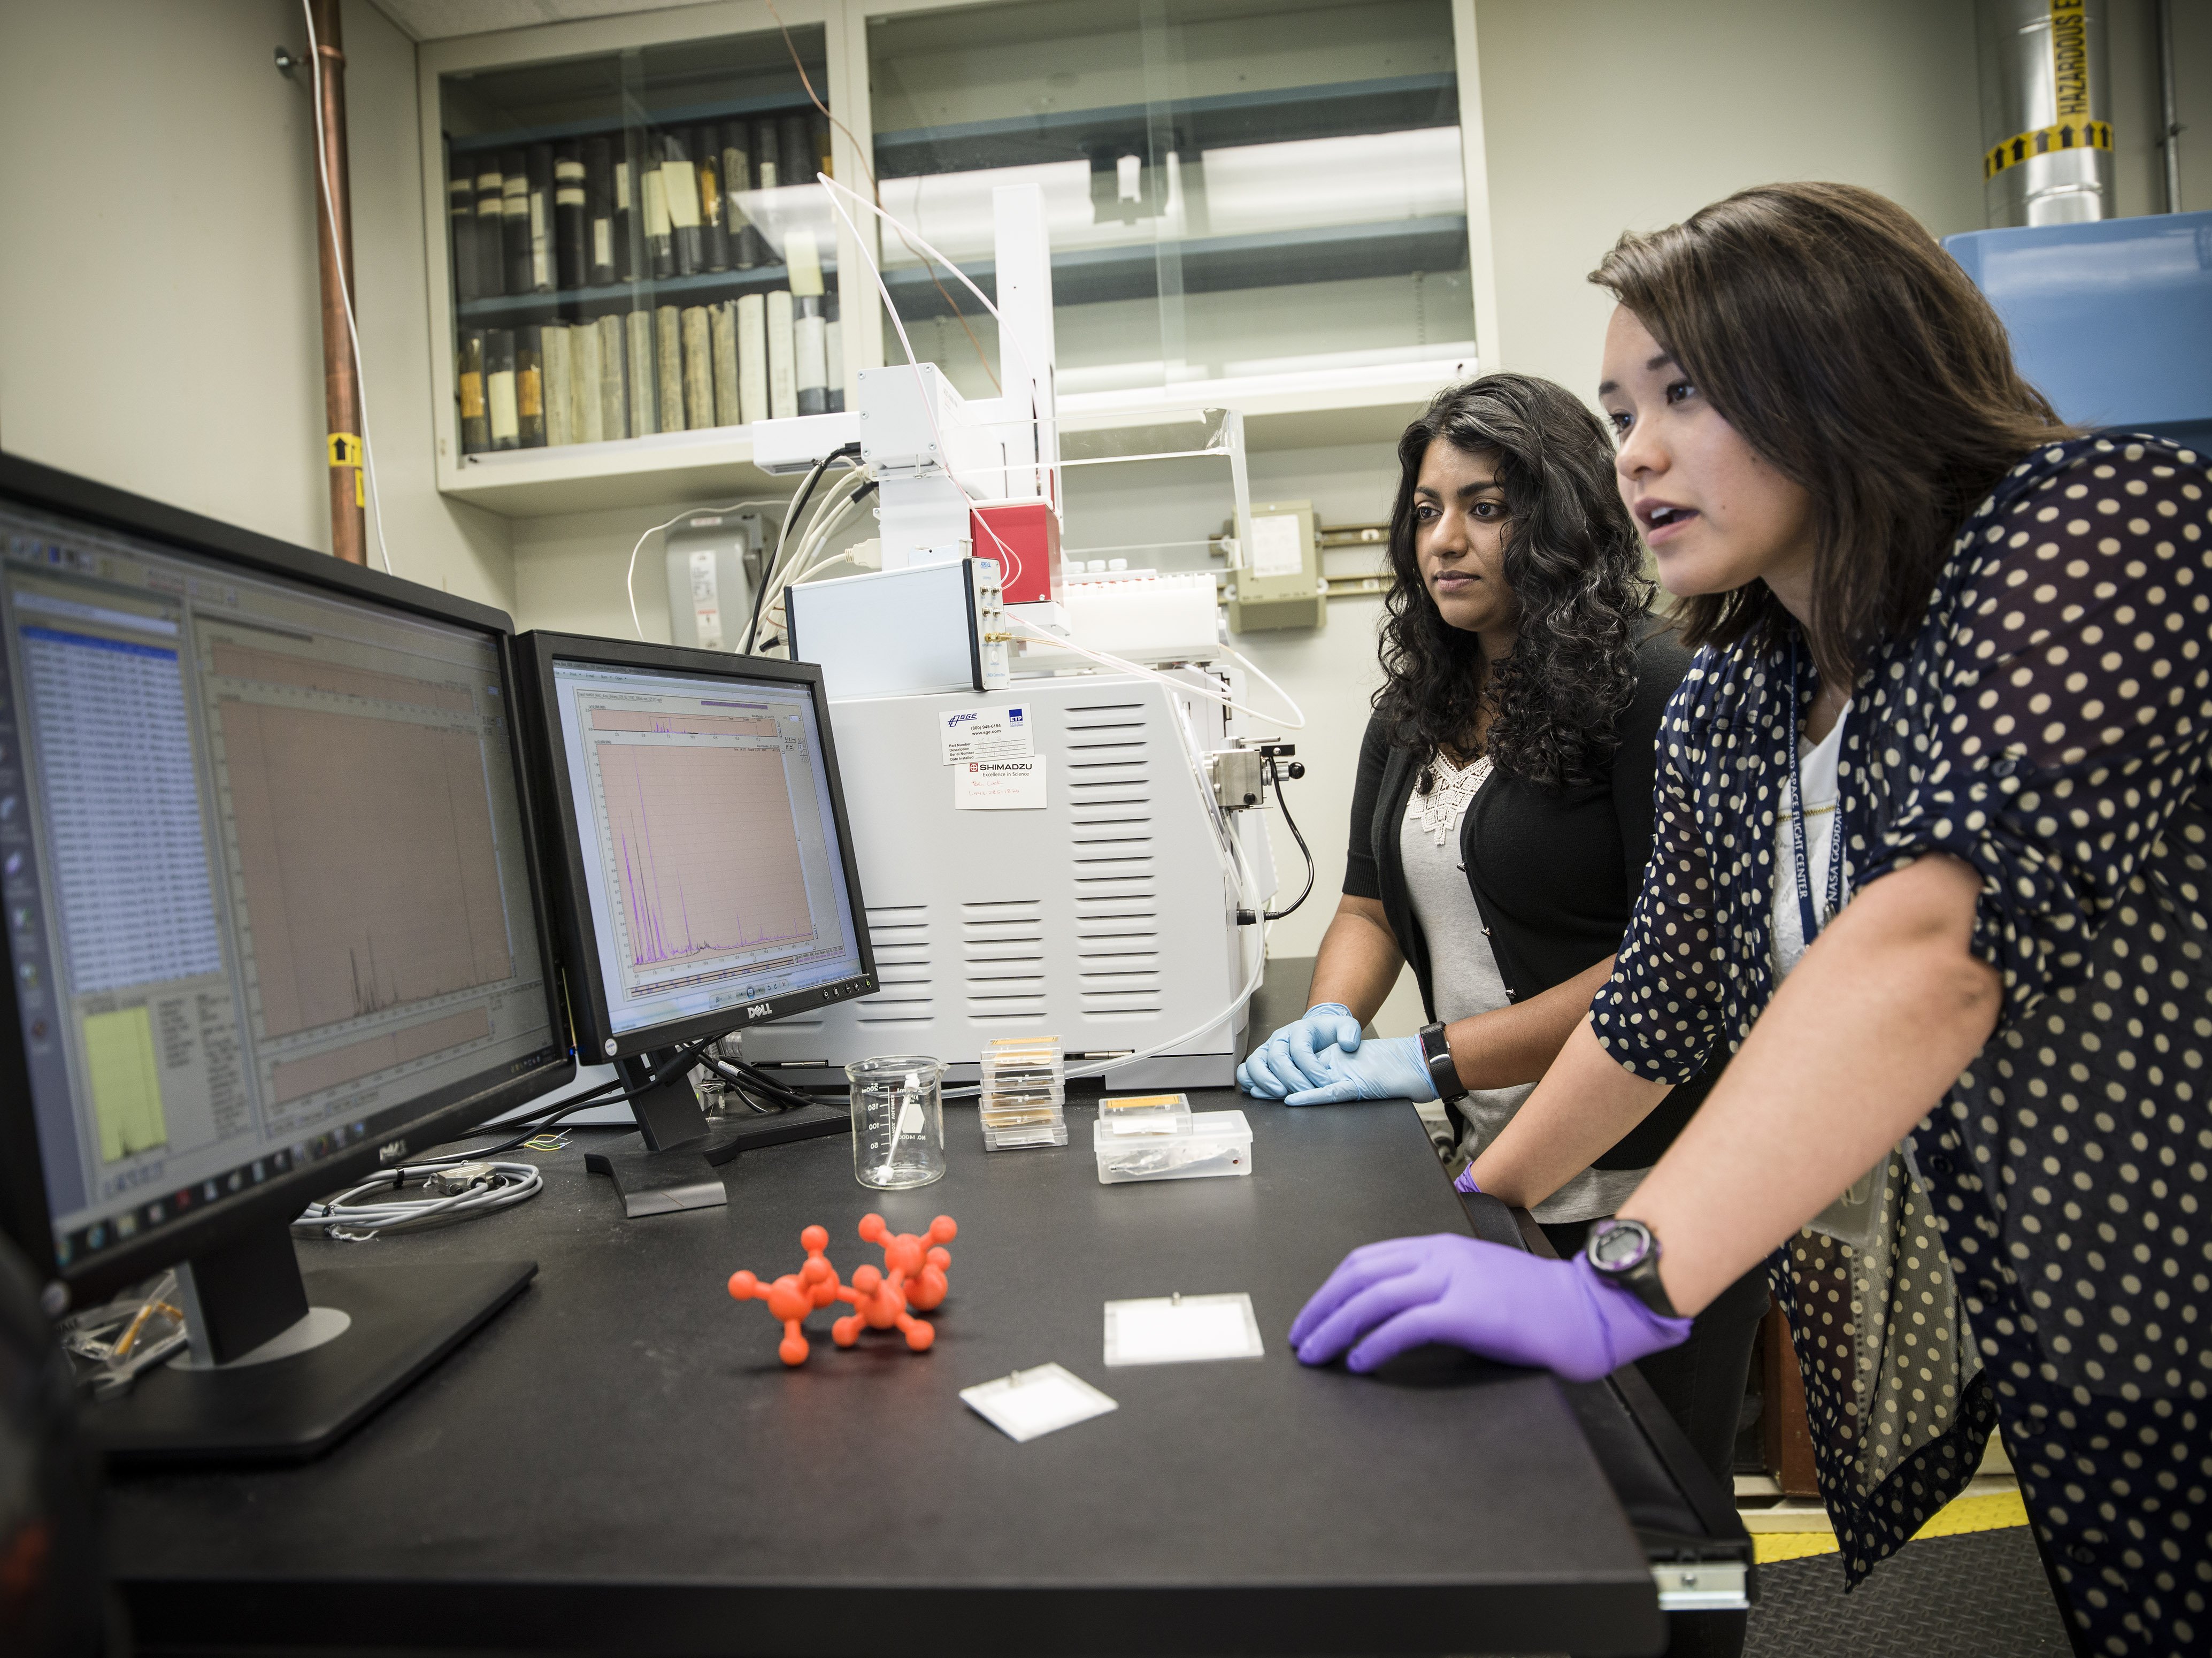 Jennifer Domanowski (forefront) and Nithin Abraham begin evaluating the effectiveness of a NASA-developed adsorber coating for removing mercury vapor and other contaminants inside Smithsonian-owned specimen-storage cabinets. Credits: Chris Gunn/NASA